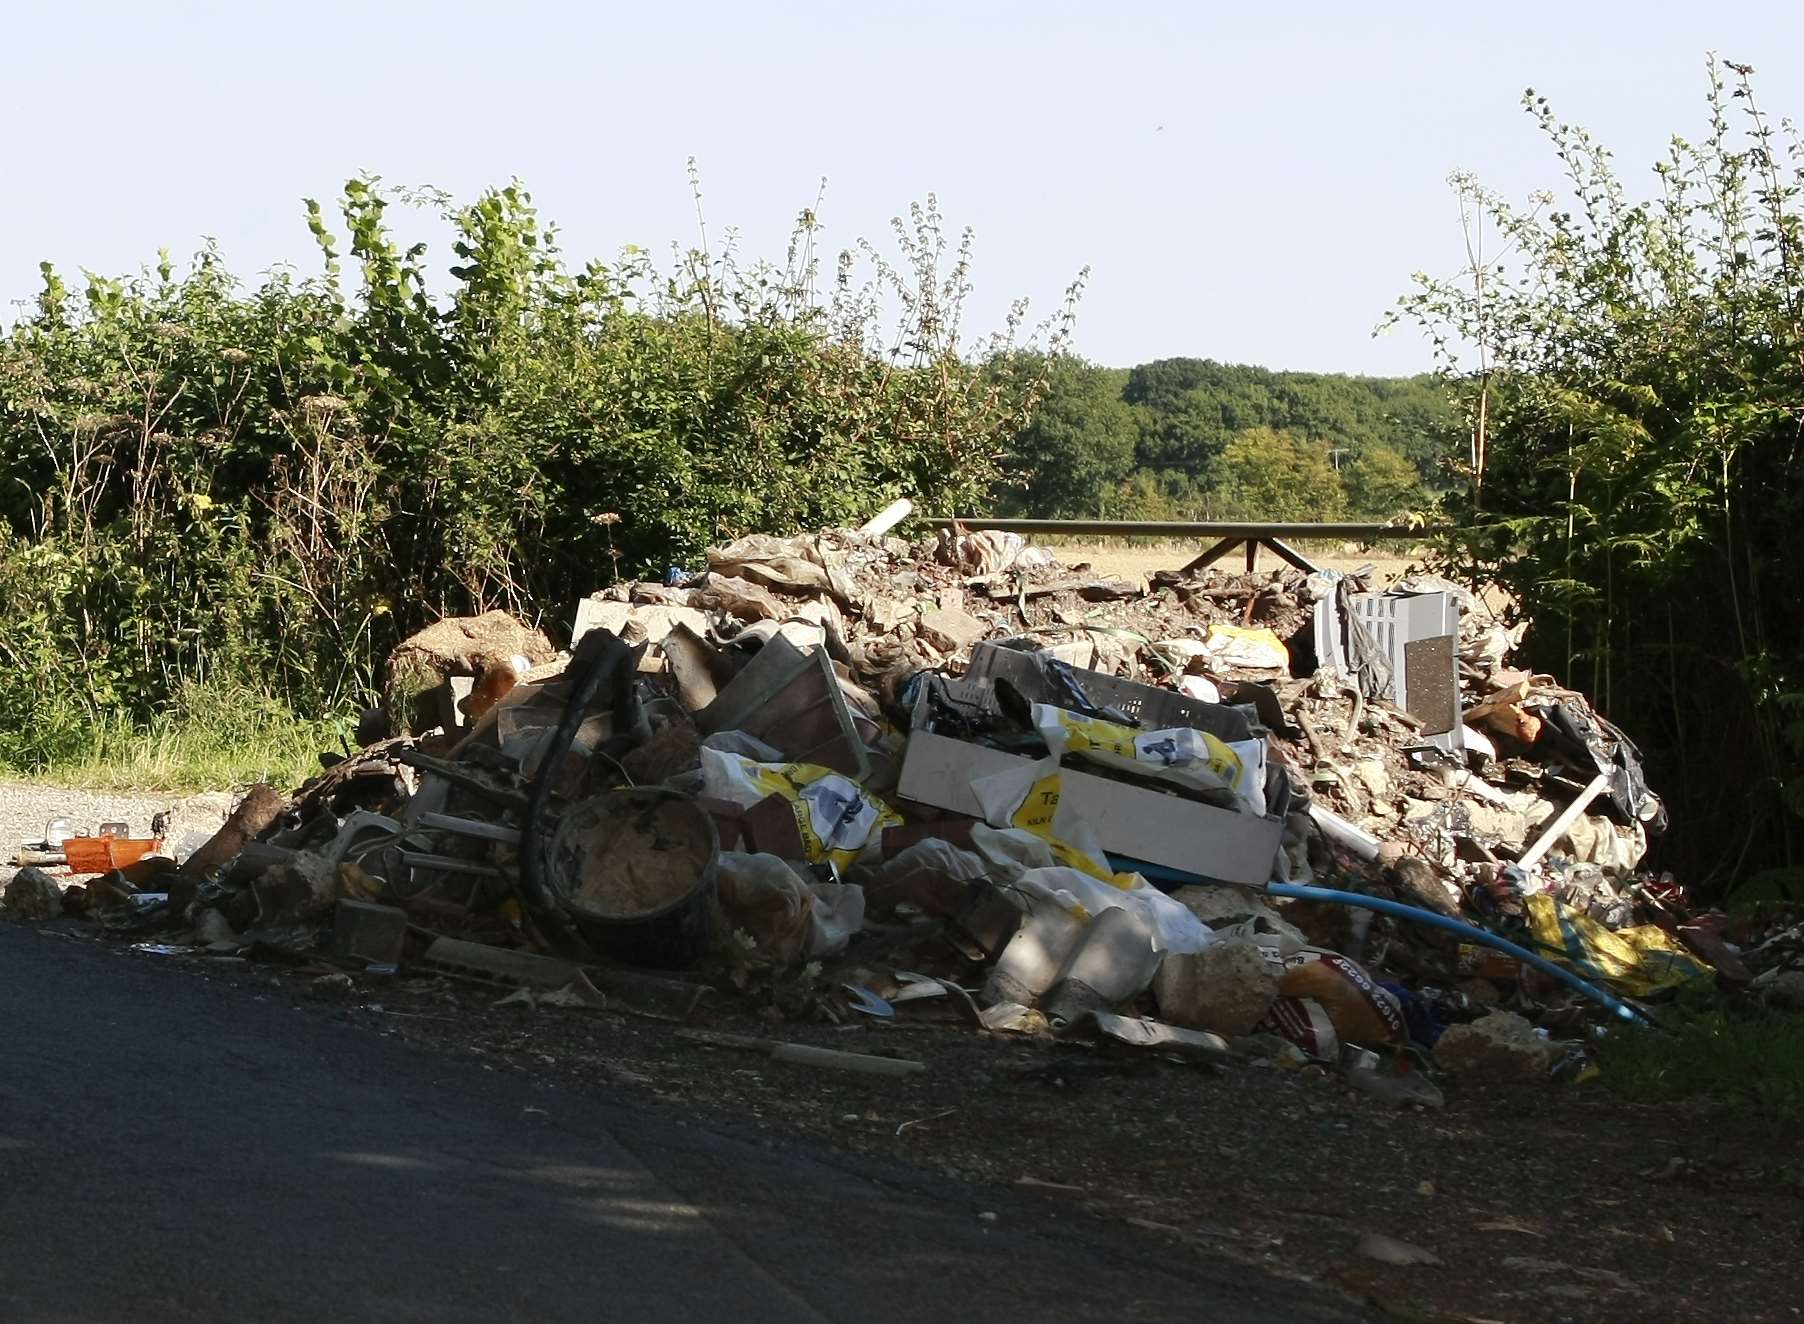 The road is closed due to fly tipping. Stock image.